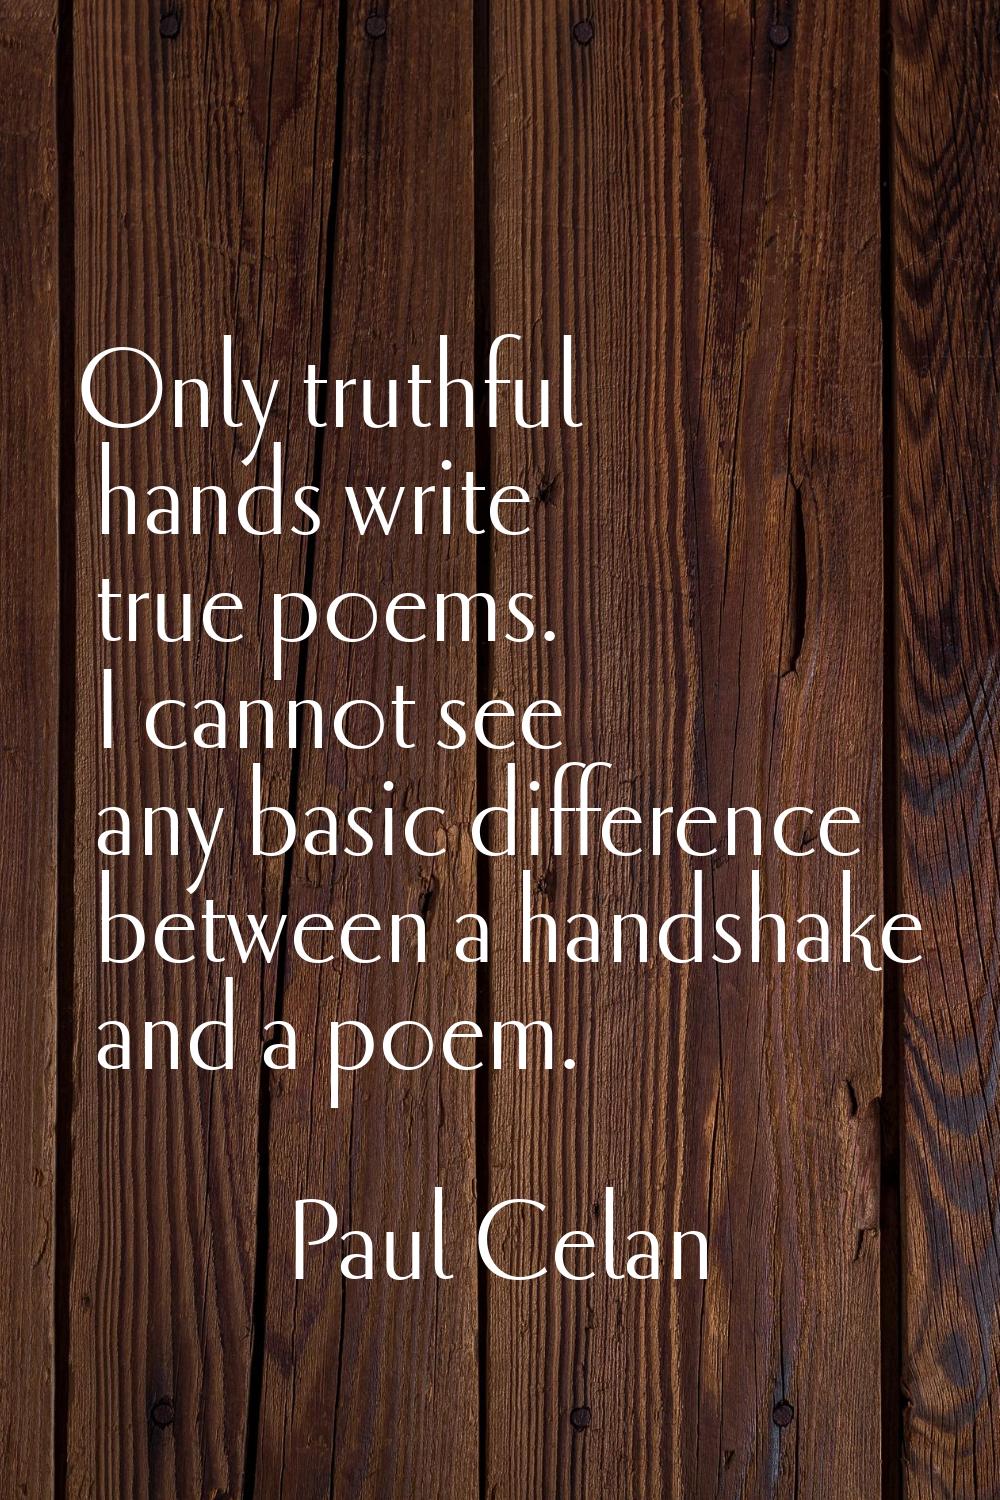 Only truthful hands write true poems. I cannot see any basic difference between a handshake and a p